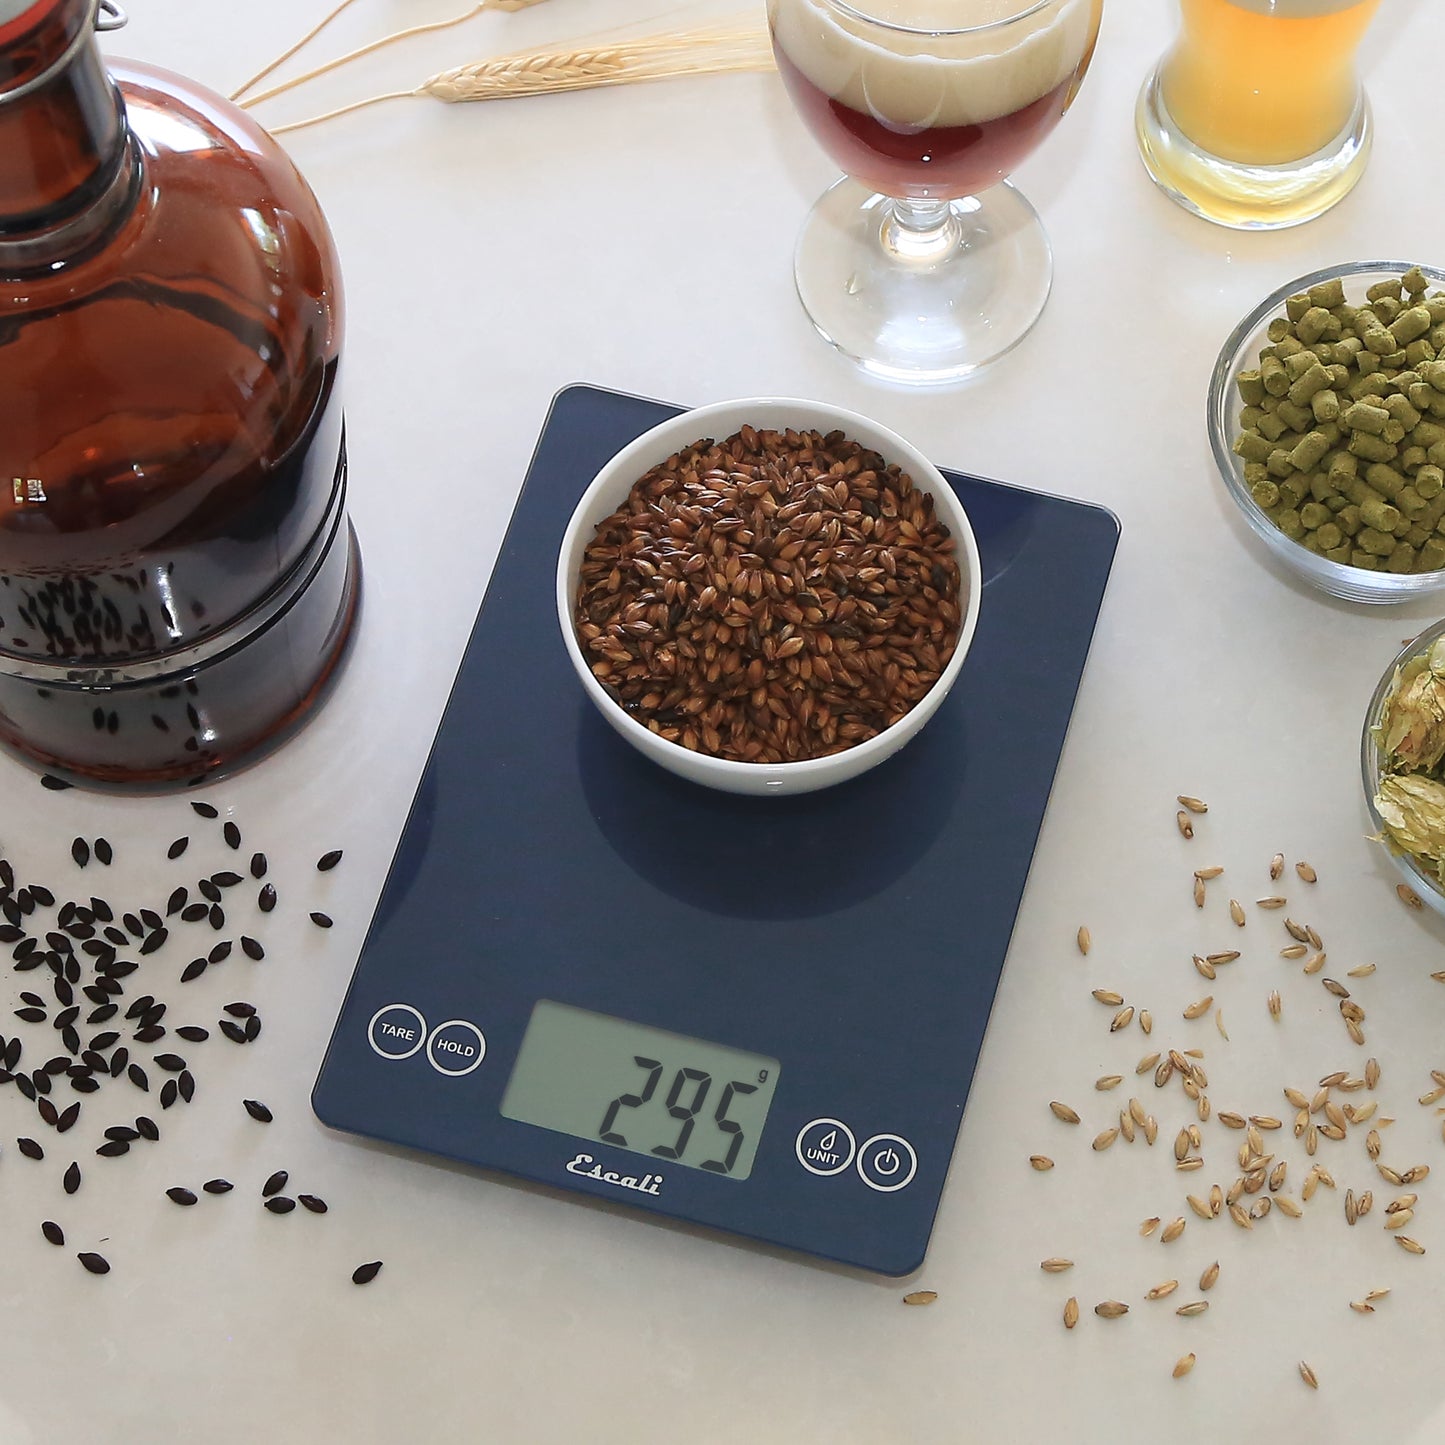 A lifestyle photo of an ARTI Digital Kitchen Scale weighing and surrounded by homebrew ingredients.